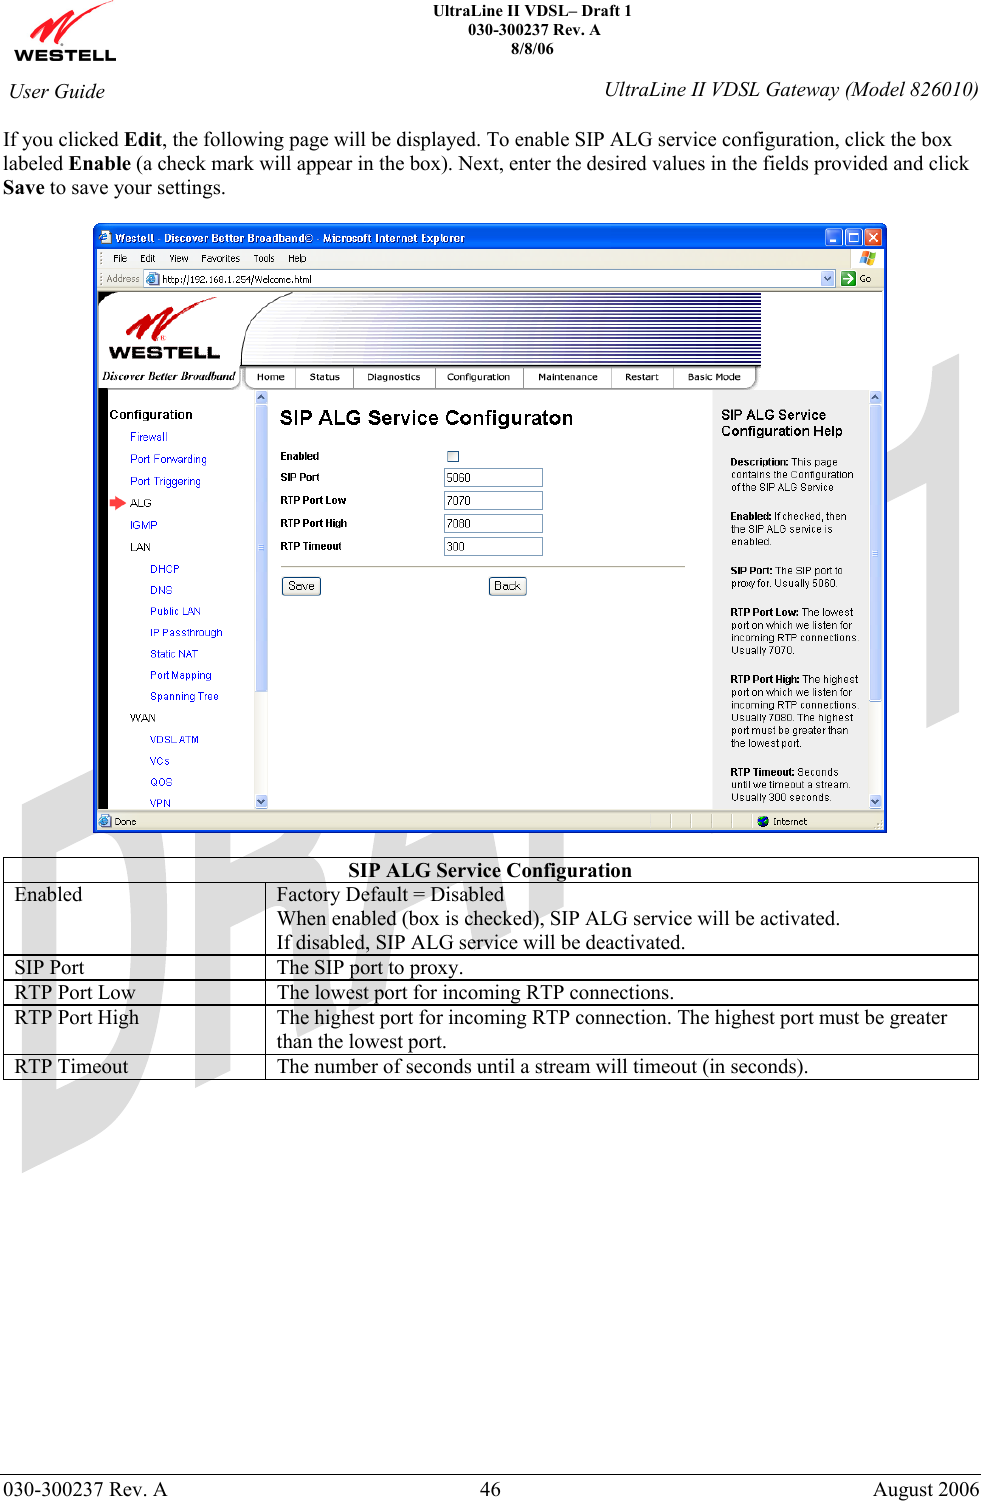    UltraLine II VDSL– Draft 1  030-300237 Rev. A 8/8/06   030-300237 Rev. A  46  August 2006  User Guide  UltraLine II VDSL Gateway (Model 826010) If you clicked Edit, the following page will be displayed. To enable SIP ALG service configuration, click the box labeled Enable (a check mark will appear in the box). Next, enter the desired values in the fields provided and click Save to save your settings.    SIP ALG Service Configuration Enabled  Factory Default = Disabled When enabled (box is checked), SIP ALG service will be activated. If disabled, SIP ALG service will be deactivated. SIP Port  The SIP port to proxy. RTP Port Low  The lowest port for incoming RTP connections. RTP Port High  The highest port for incoming RTP connection. The highest port must be greater than the lowest port. RTP Timeout   The number of seconds until a stream will timeout (in seconds).               